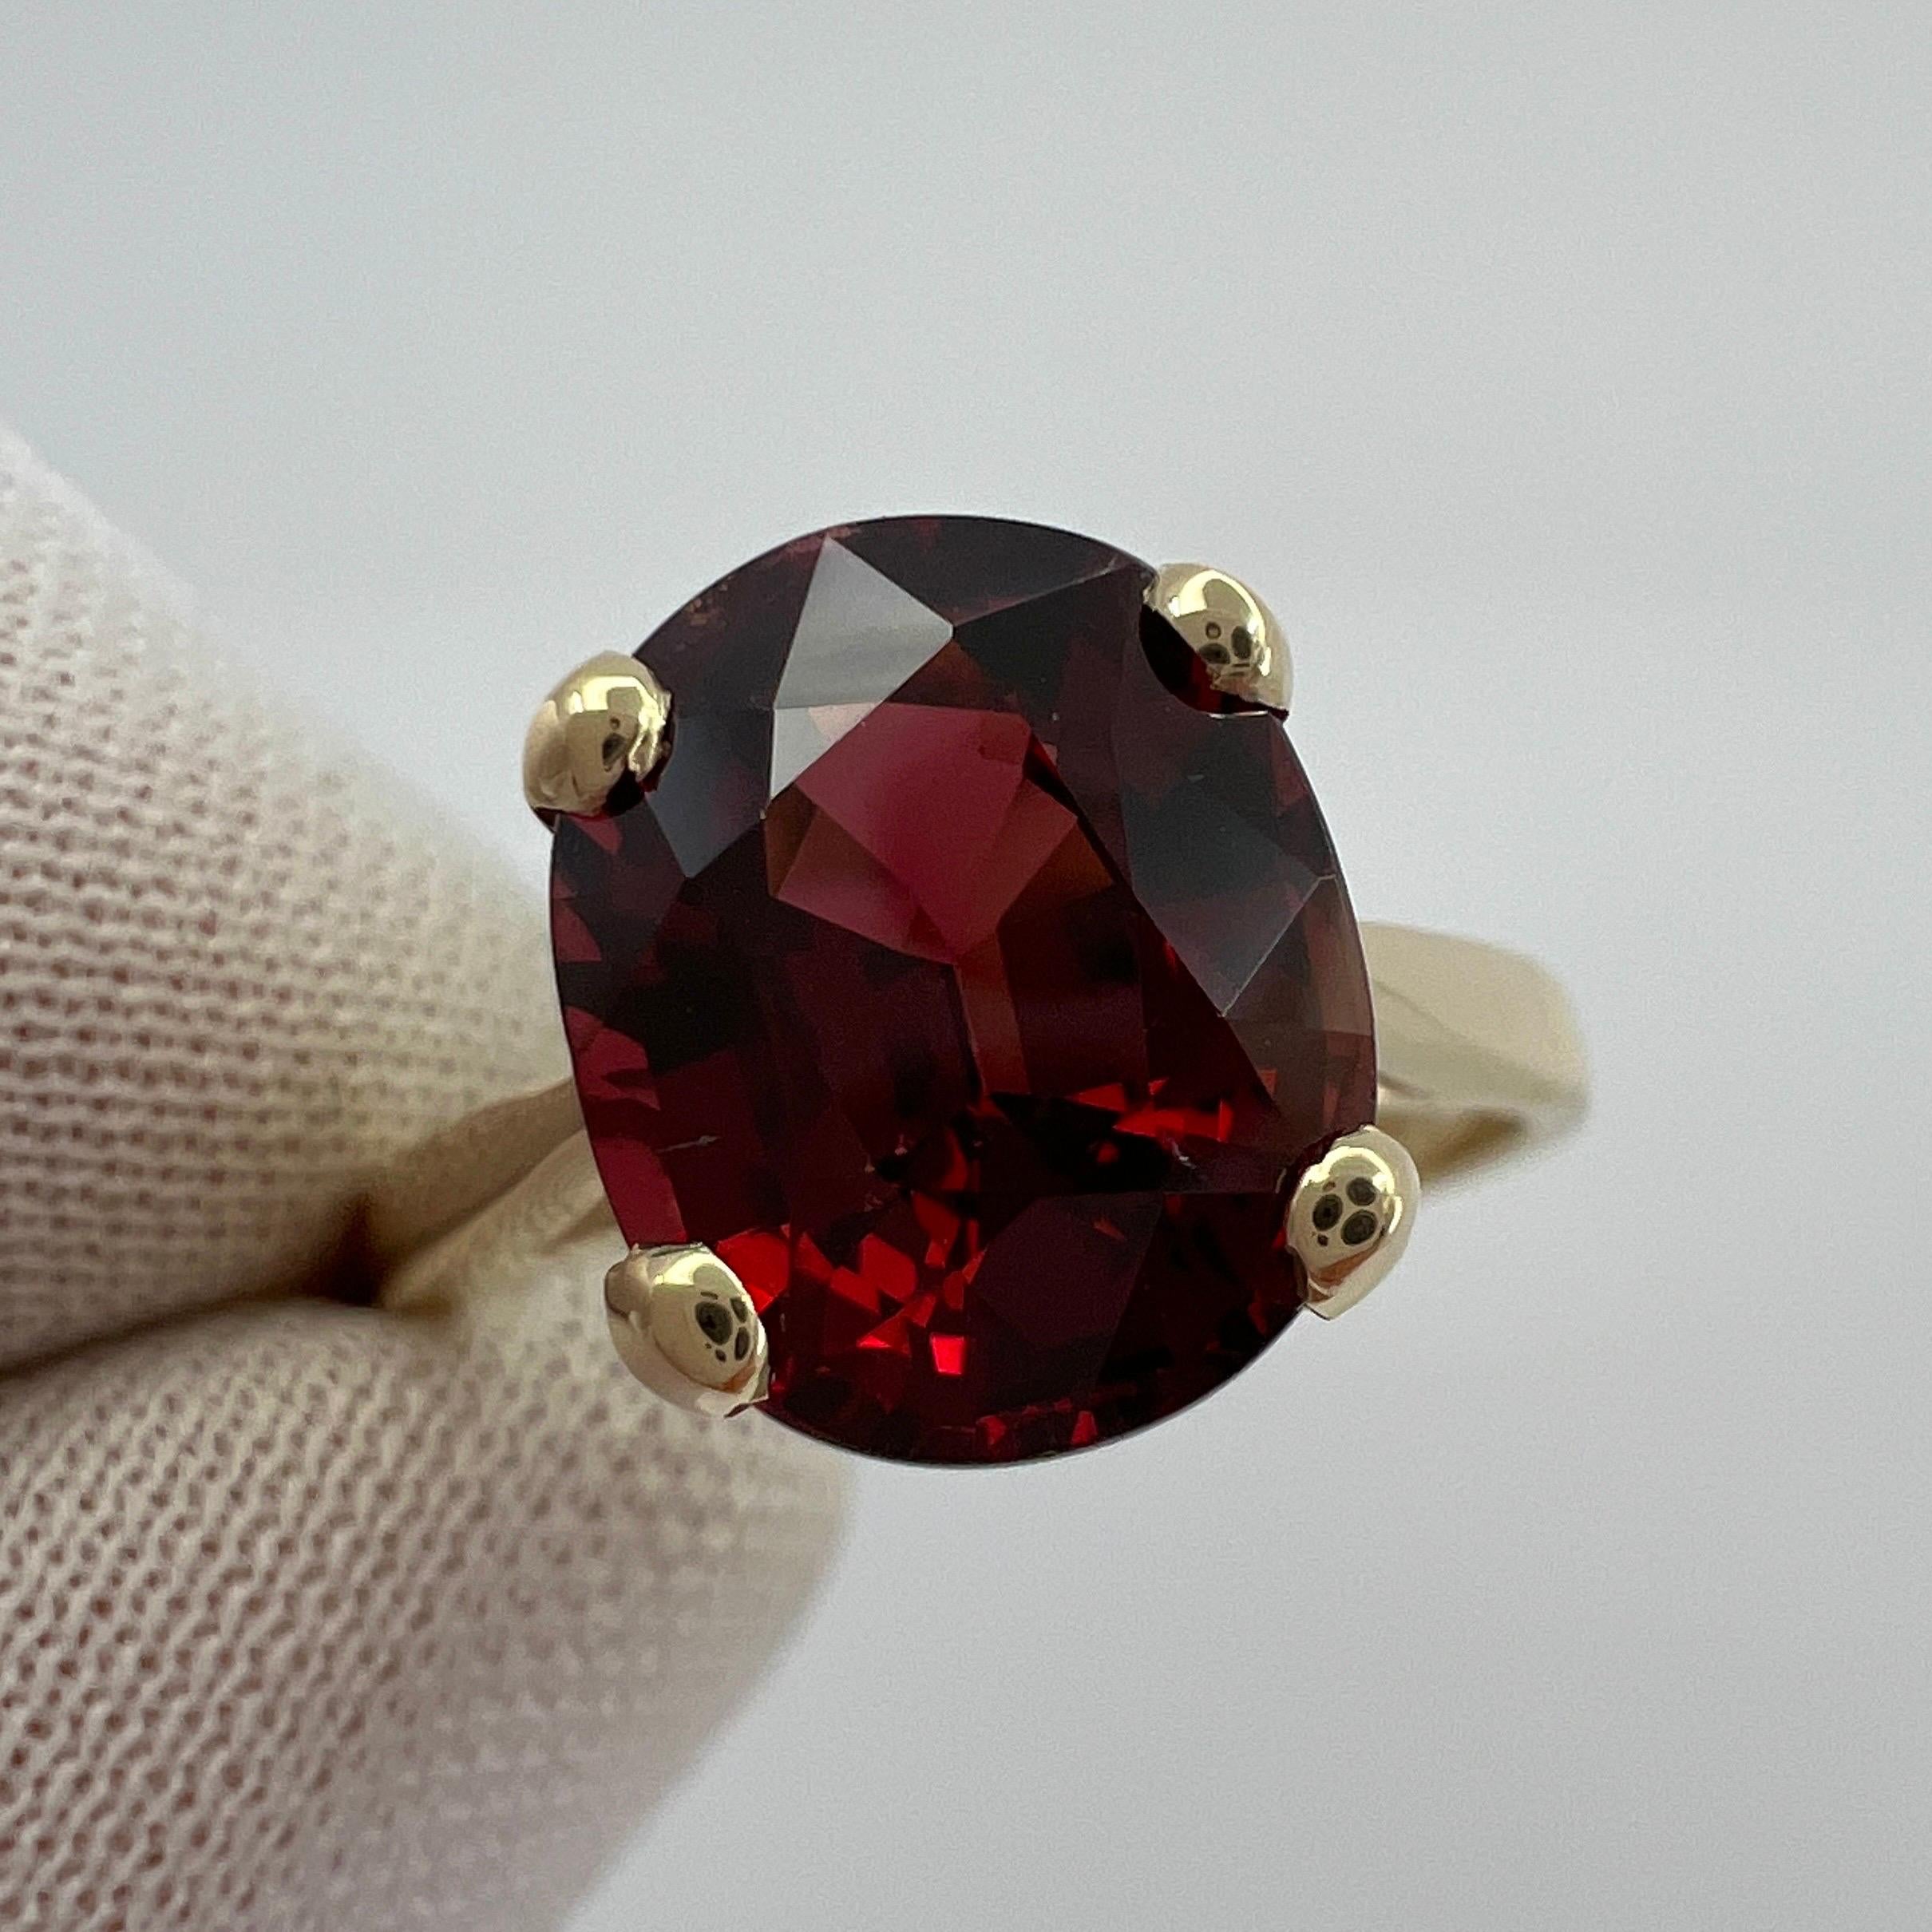 4.00ct Vivid Cherry Red Rhodolite Garnet Oval Cut Yellow Gold Solitaire Ring 1